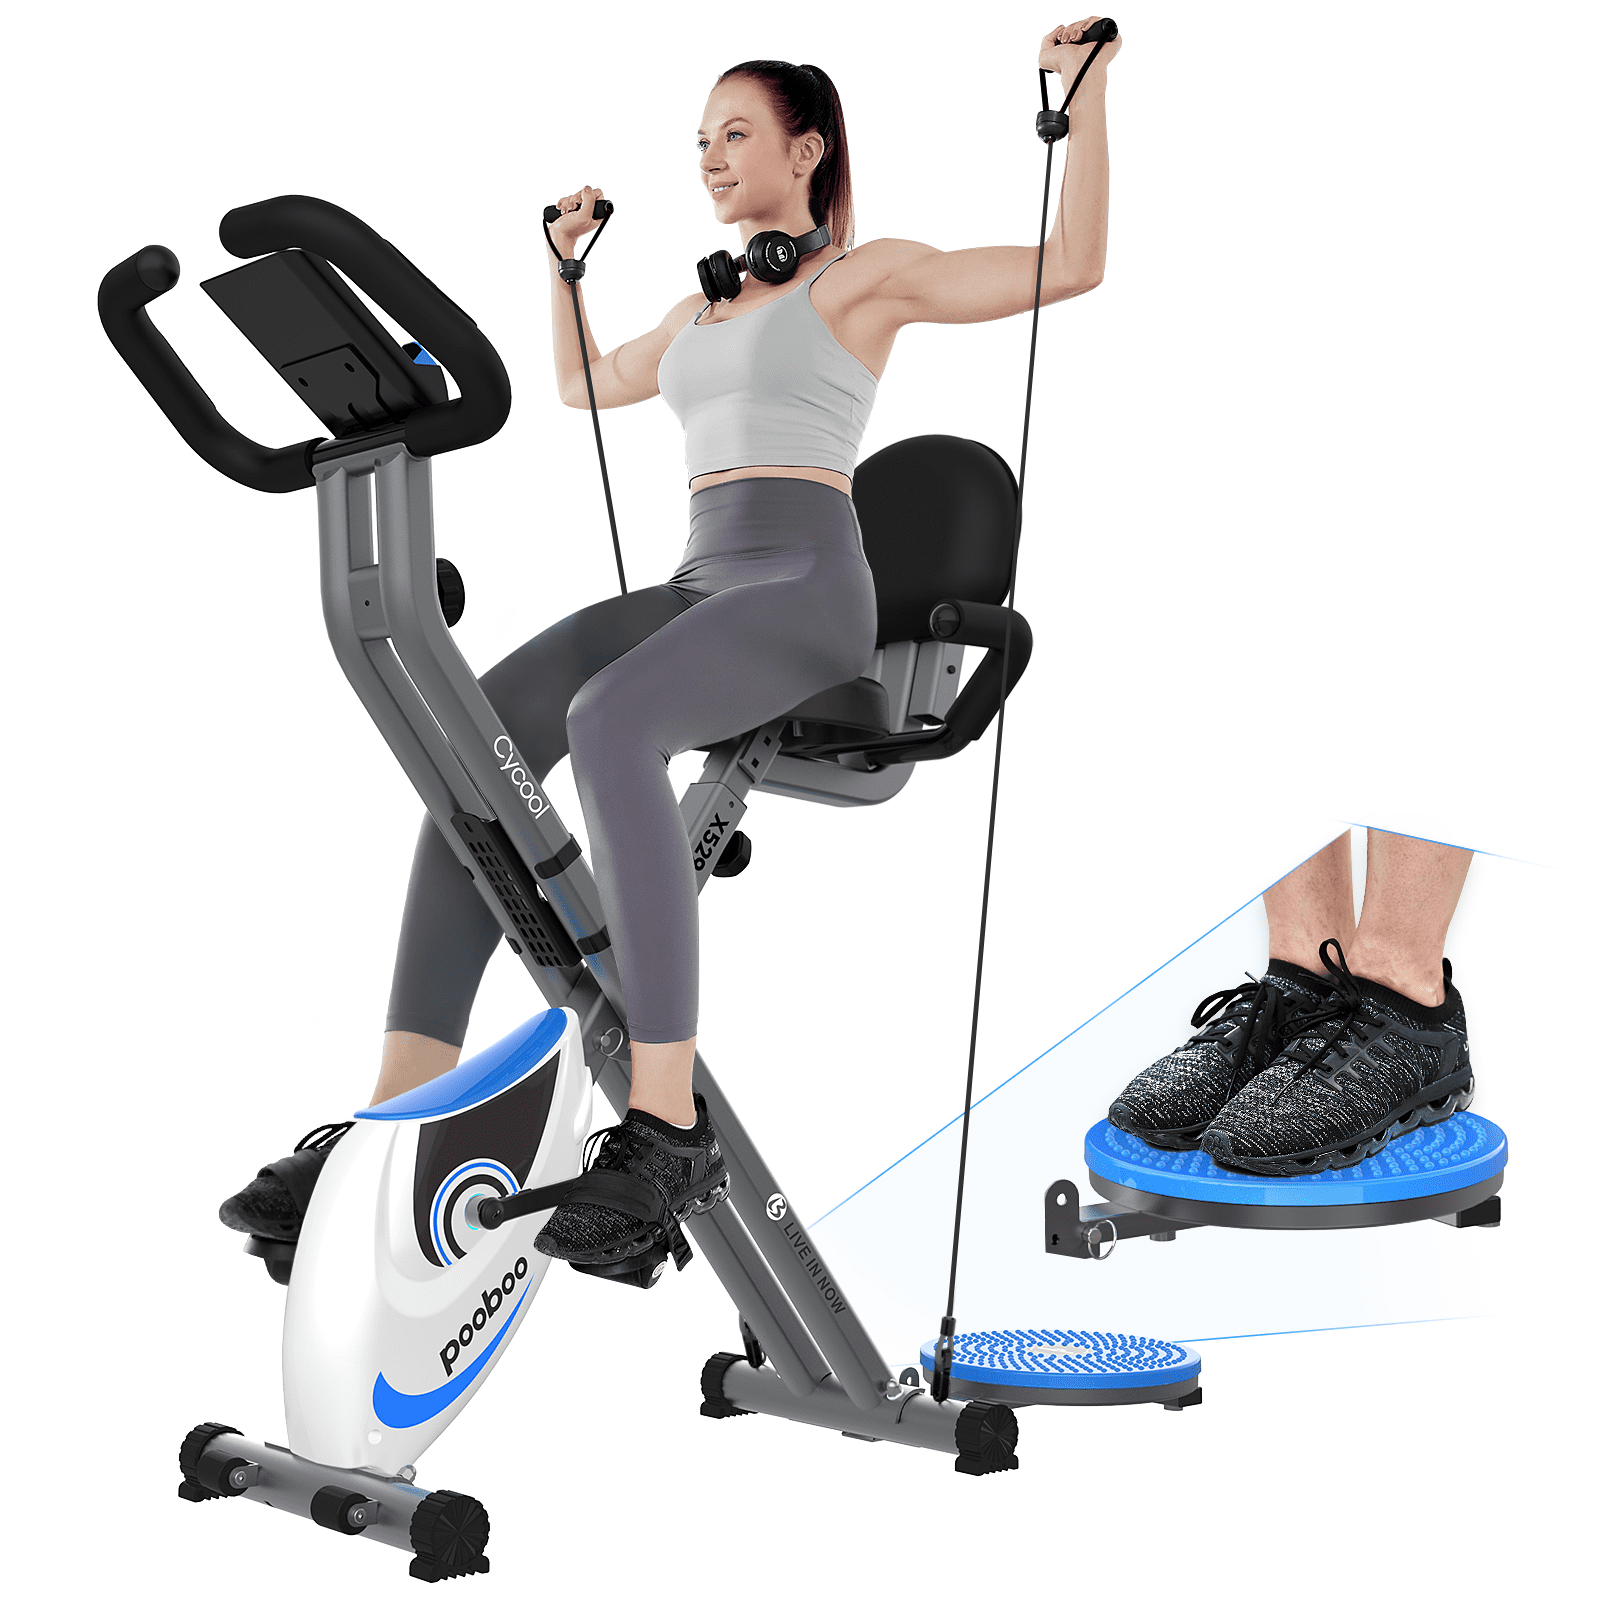 Magnetic Indoor Cycling Bike Stationary Bikes with Adjsutable Resistance and LCD Display For Home Cardio Workout cycool Recumbent Exercise Bike 